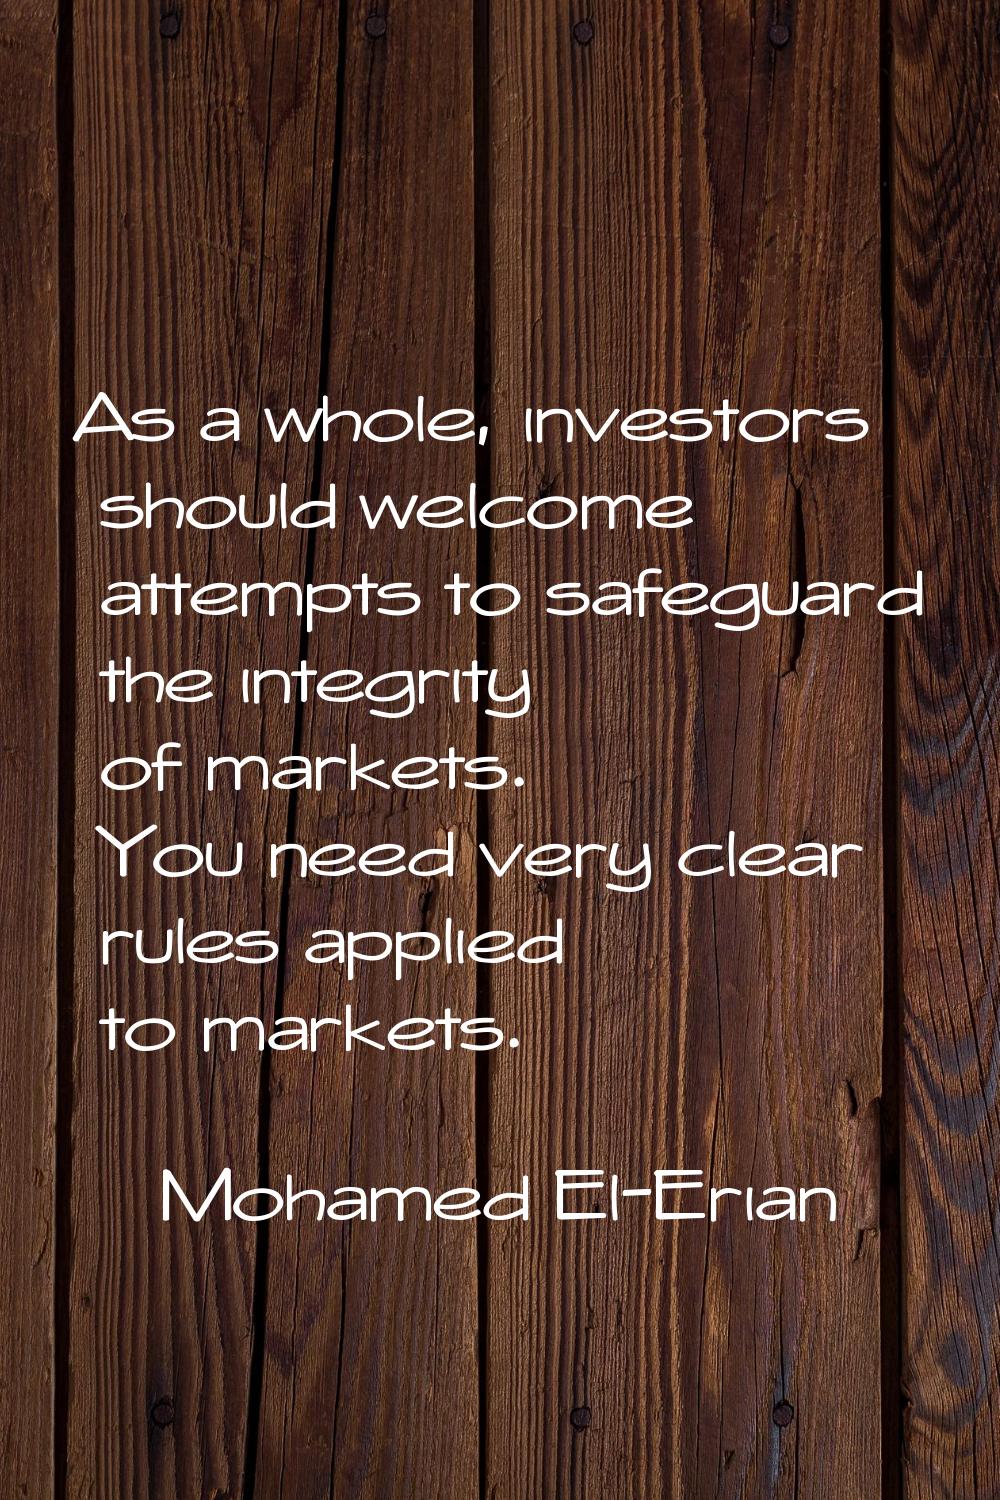 As a whole, investors should welcome attempts to safeguard the integrity of markets. You need very 